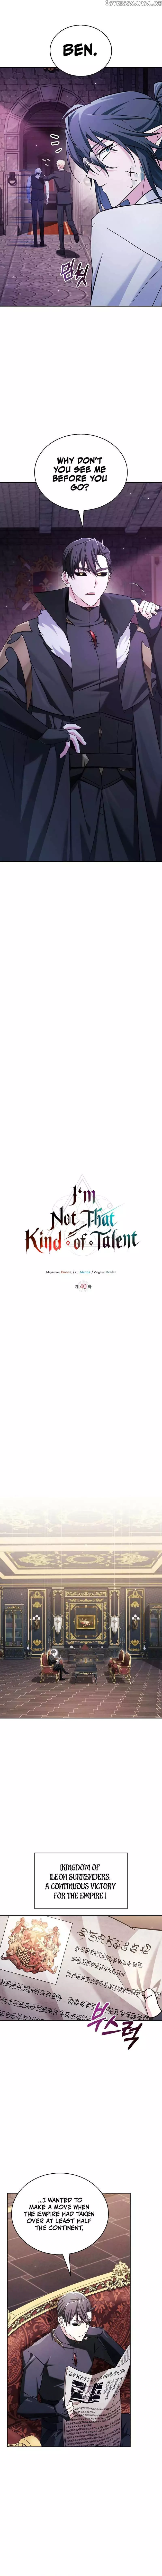 I’M Not That Kind Of Talent - 40 page 13-df7db850